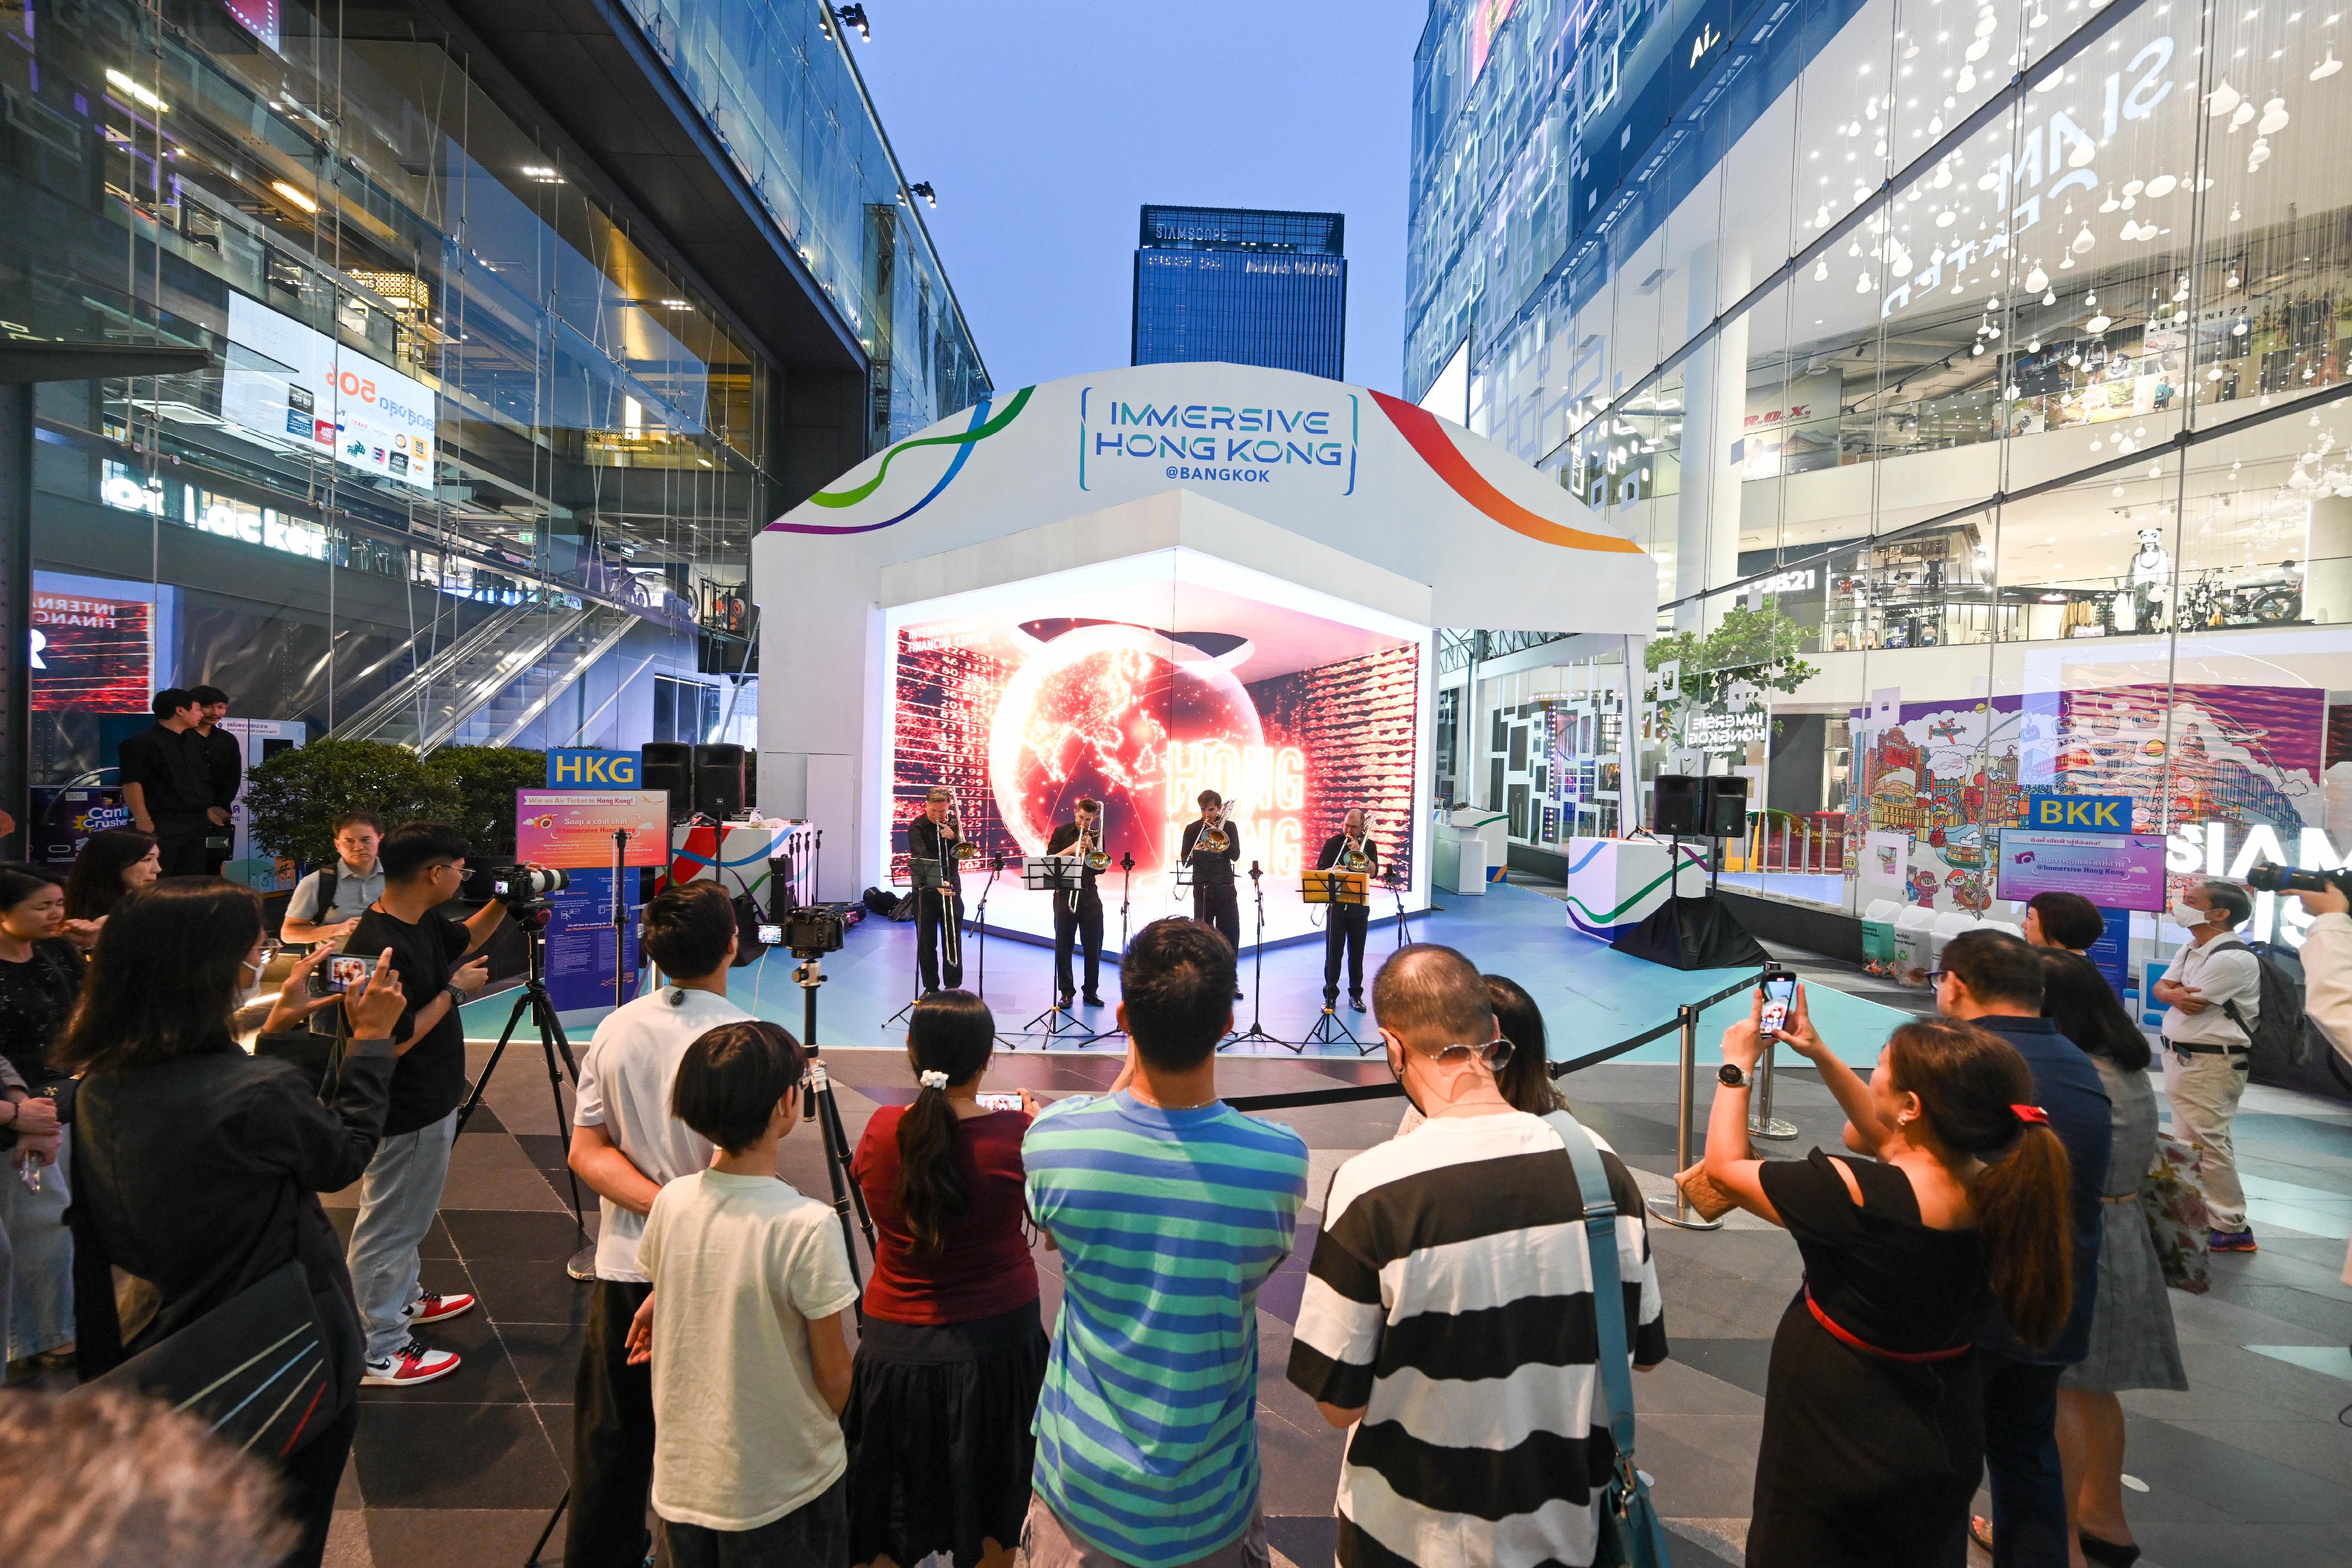 The "Immersive Hong Kong" roving exhibition, which showcases Hong Kong's unique strengths, advantages and opportunities with art technology, was launched in Bangkok, Thailand, today (October 20) as part of a promotional campaign in Association of Southeast Asian Nations countries. Photo shows a trombone quartet from the Hong Kong Philharmonic Orchestra performing at the exhibition venue.